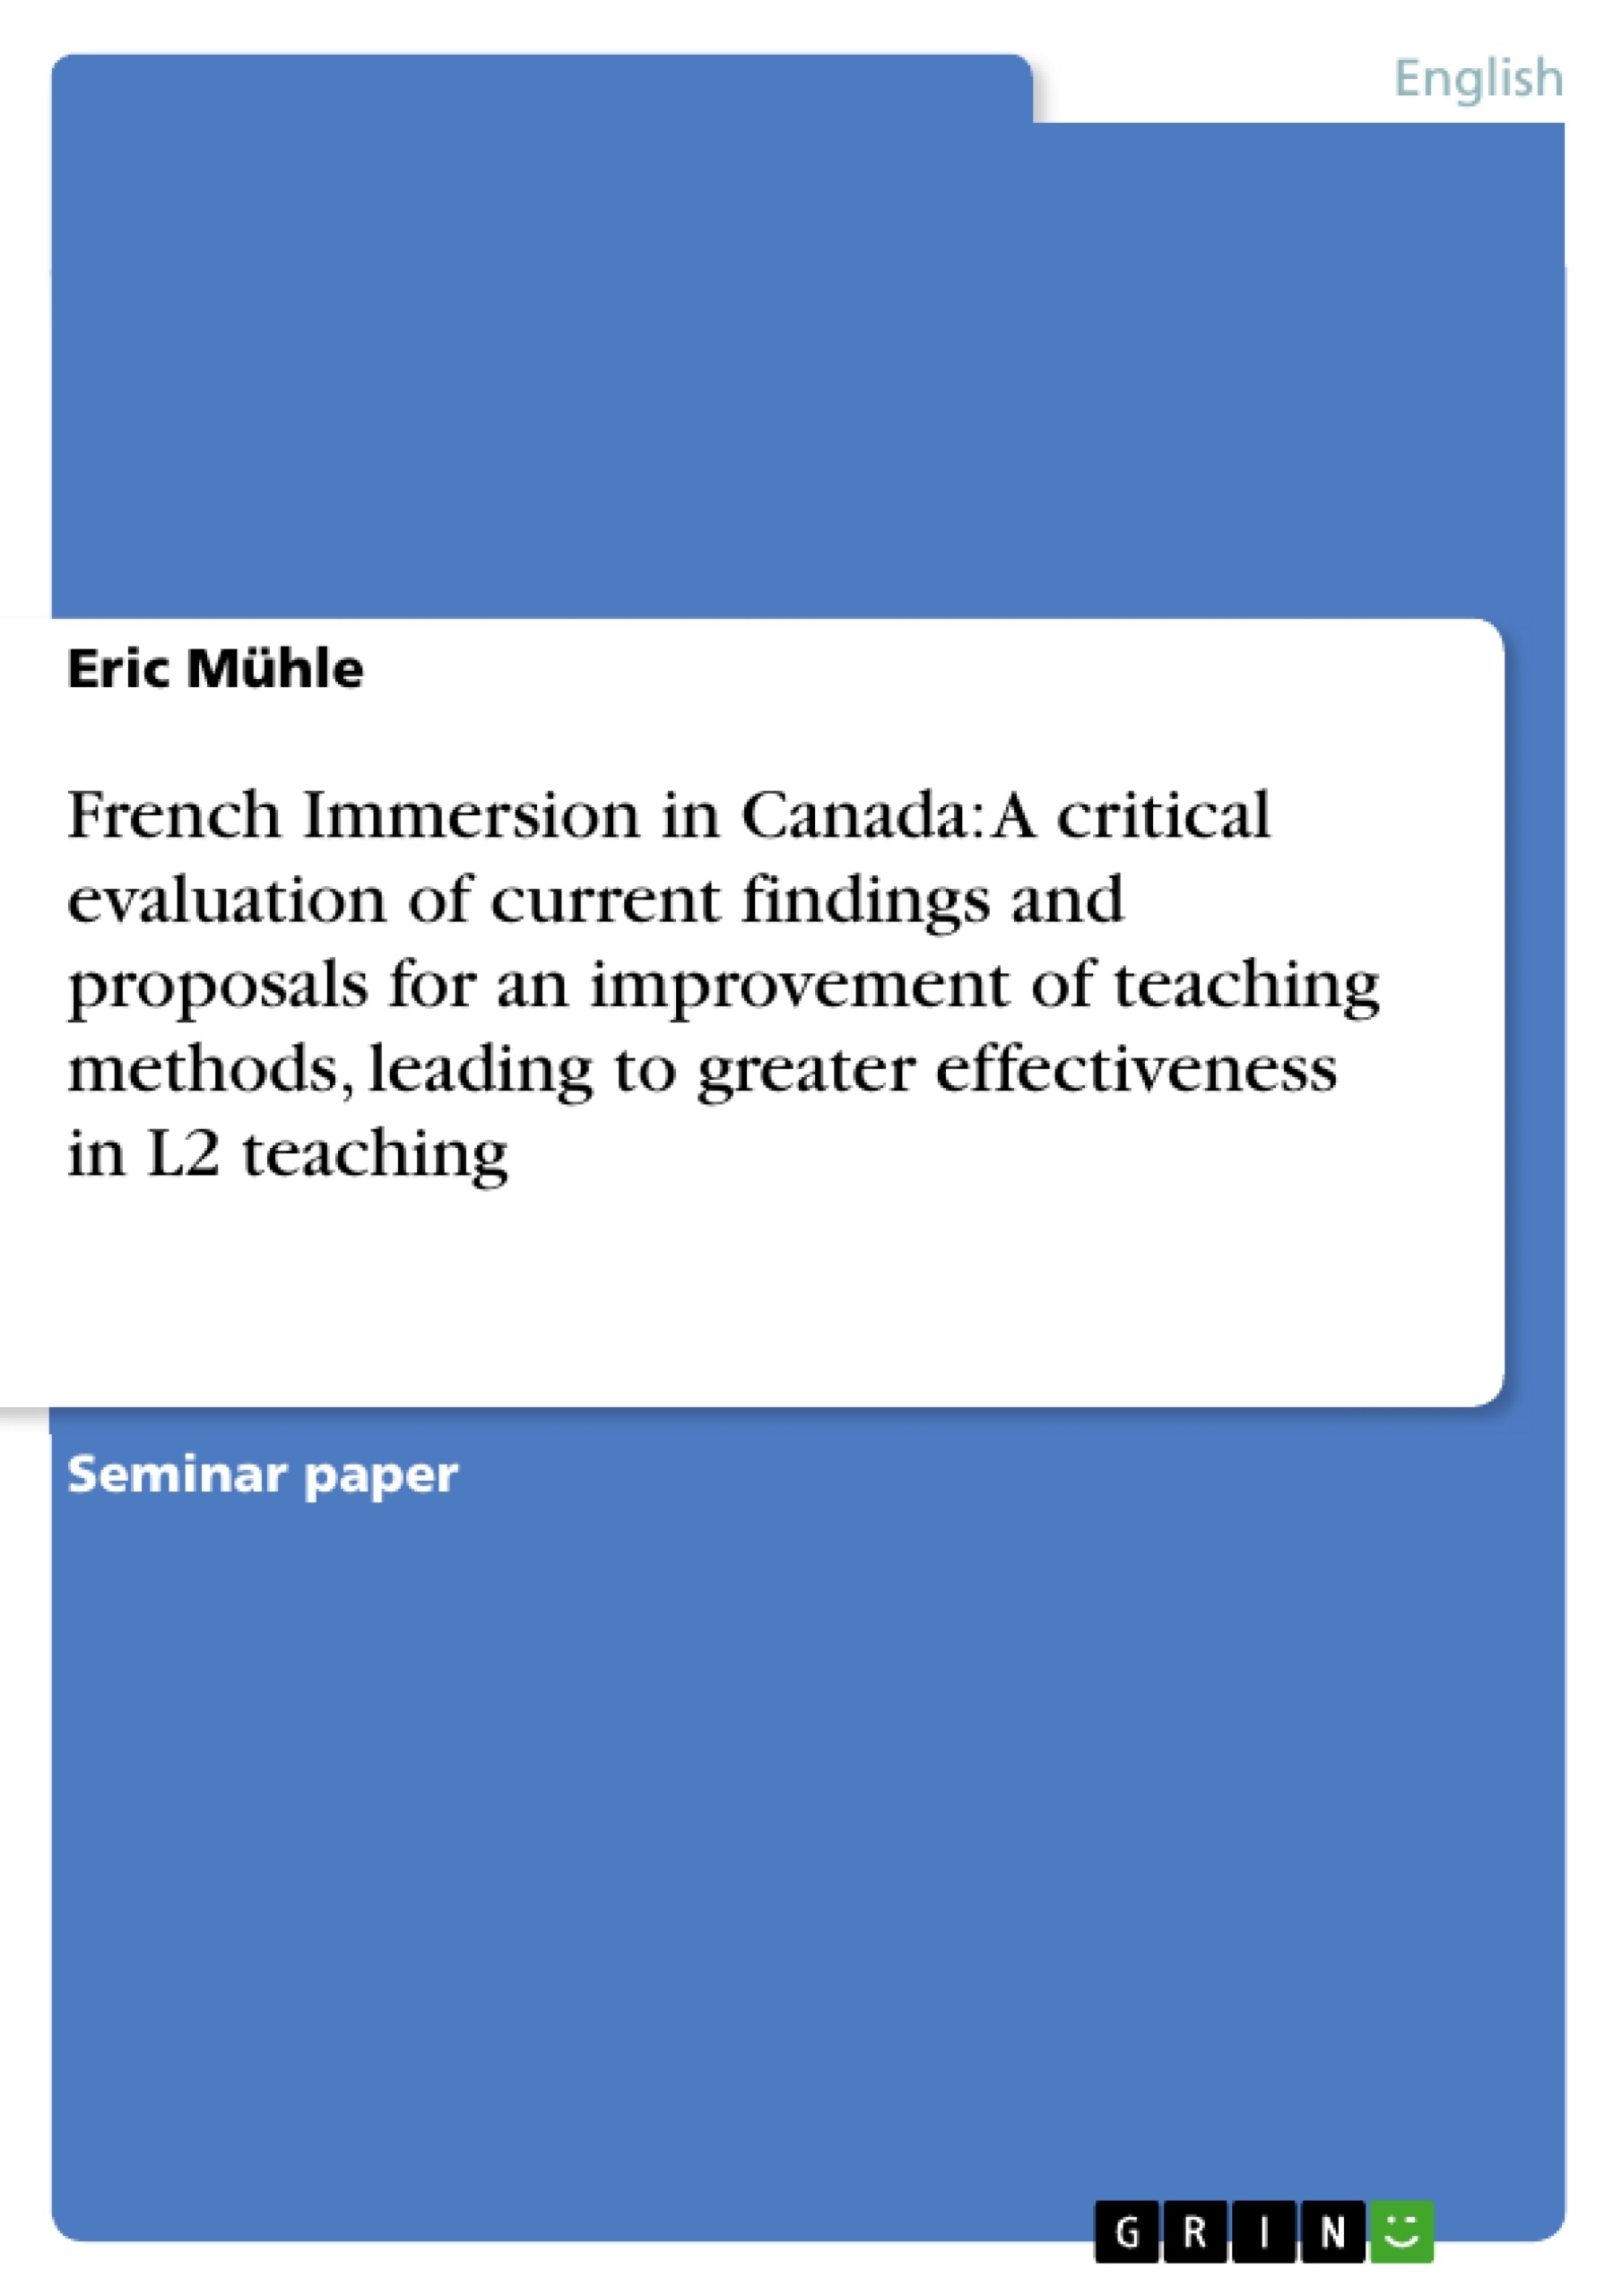 Title: French Immersion in Canada: A critical evaluation of current findings and proposals for an improvement of teaching methods, leading to greater effectiveness in L2 teaching